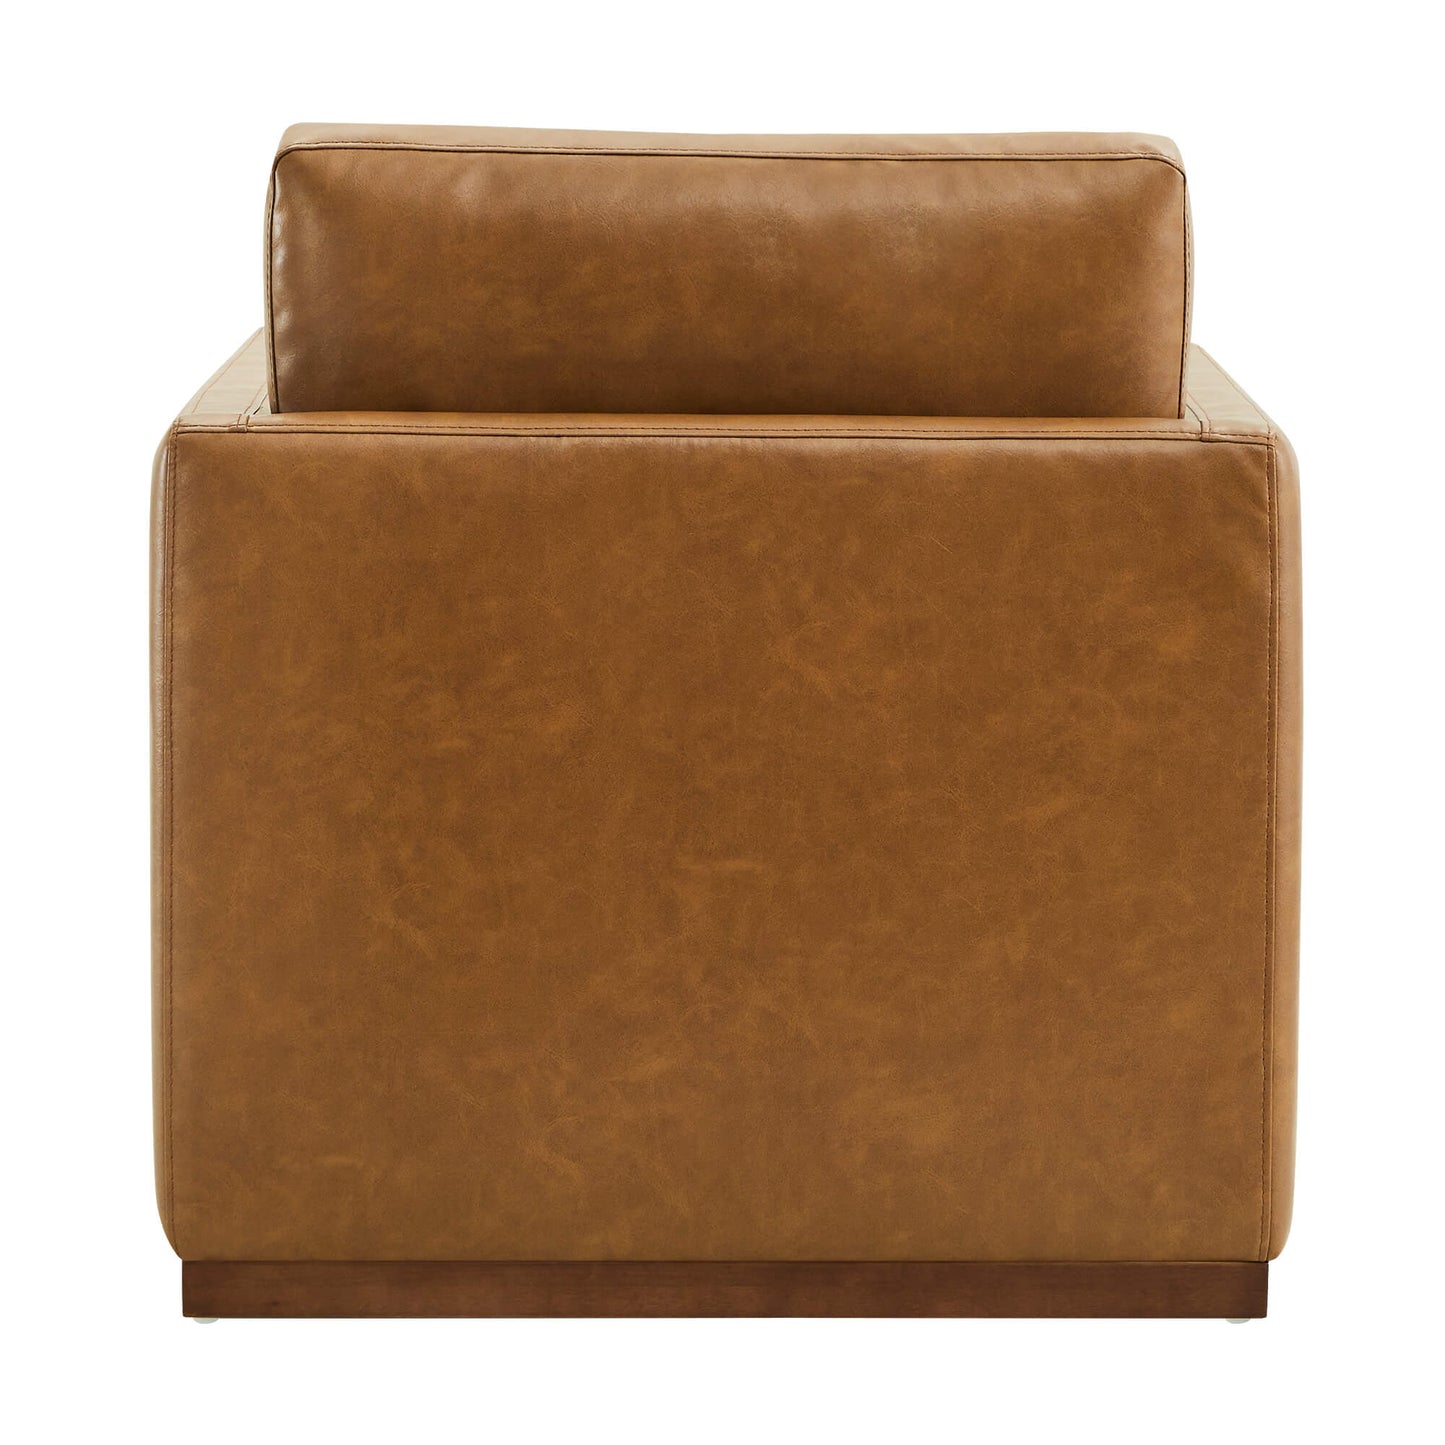 CHITA LIVING-Henry Modern Swivel Accent Chair-Accent Chair-Faux Leather-Saddle Brown-